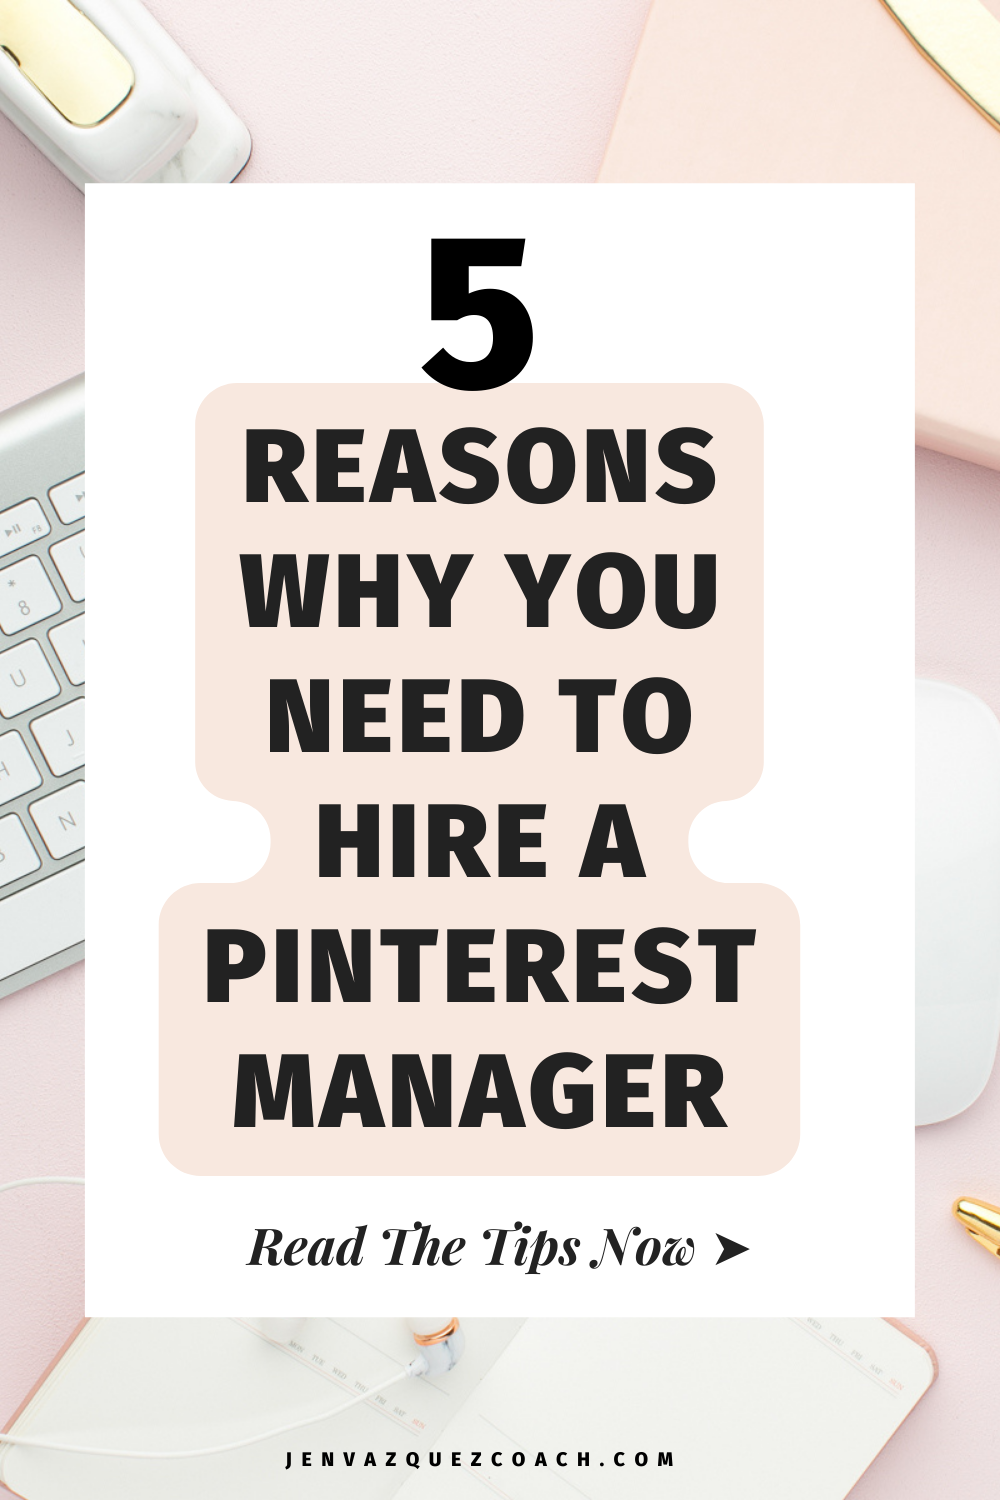 5 Reasons Why You Need To Hire A Pinterest Manager by Jen Vazquez Media Pinterest Marketing Management